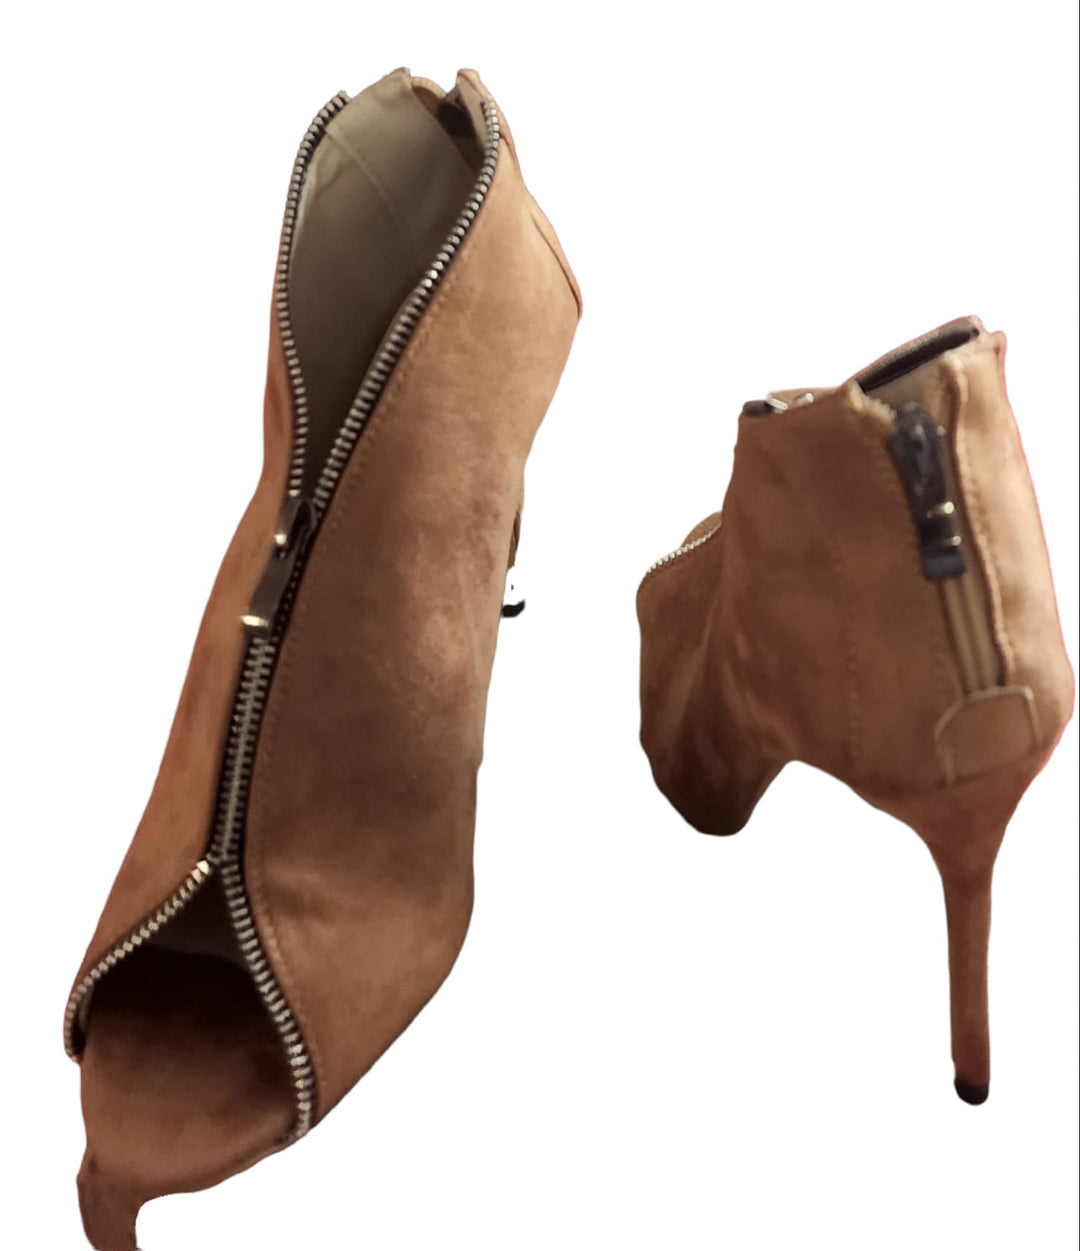 Zipper in front and back ladies high heels ankle boots.